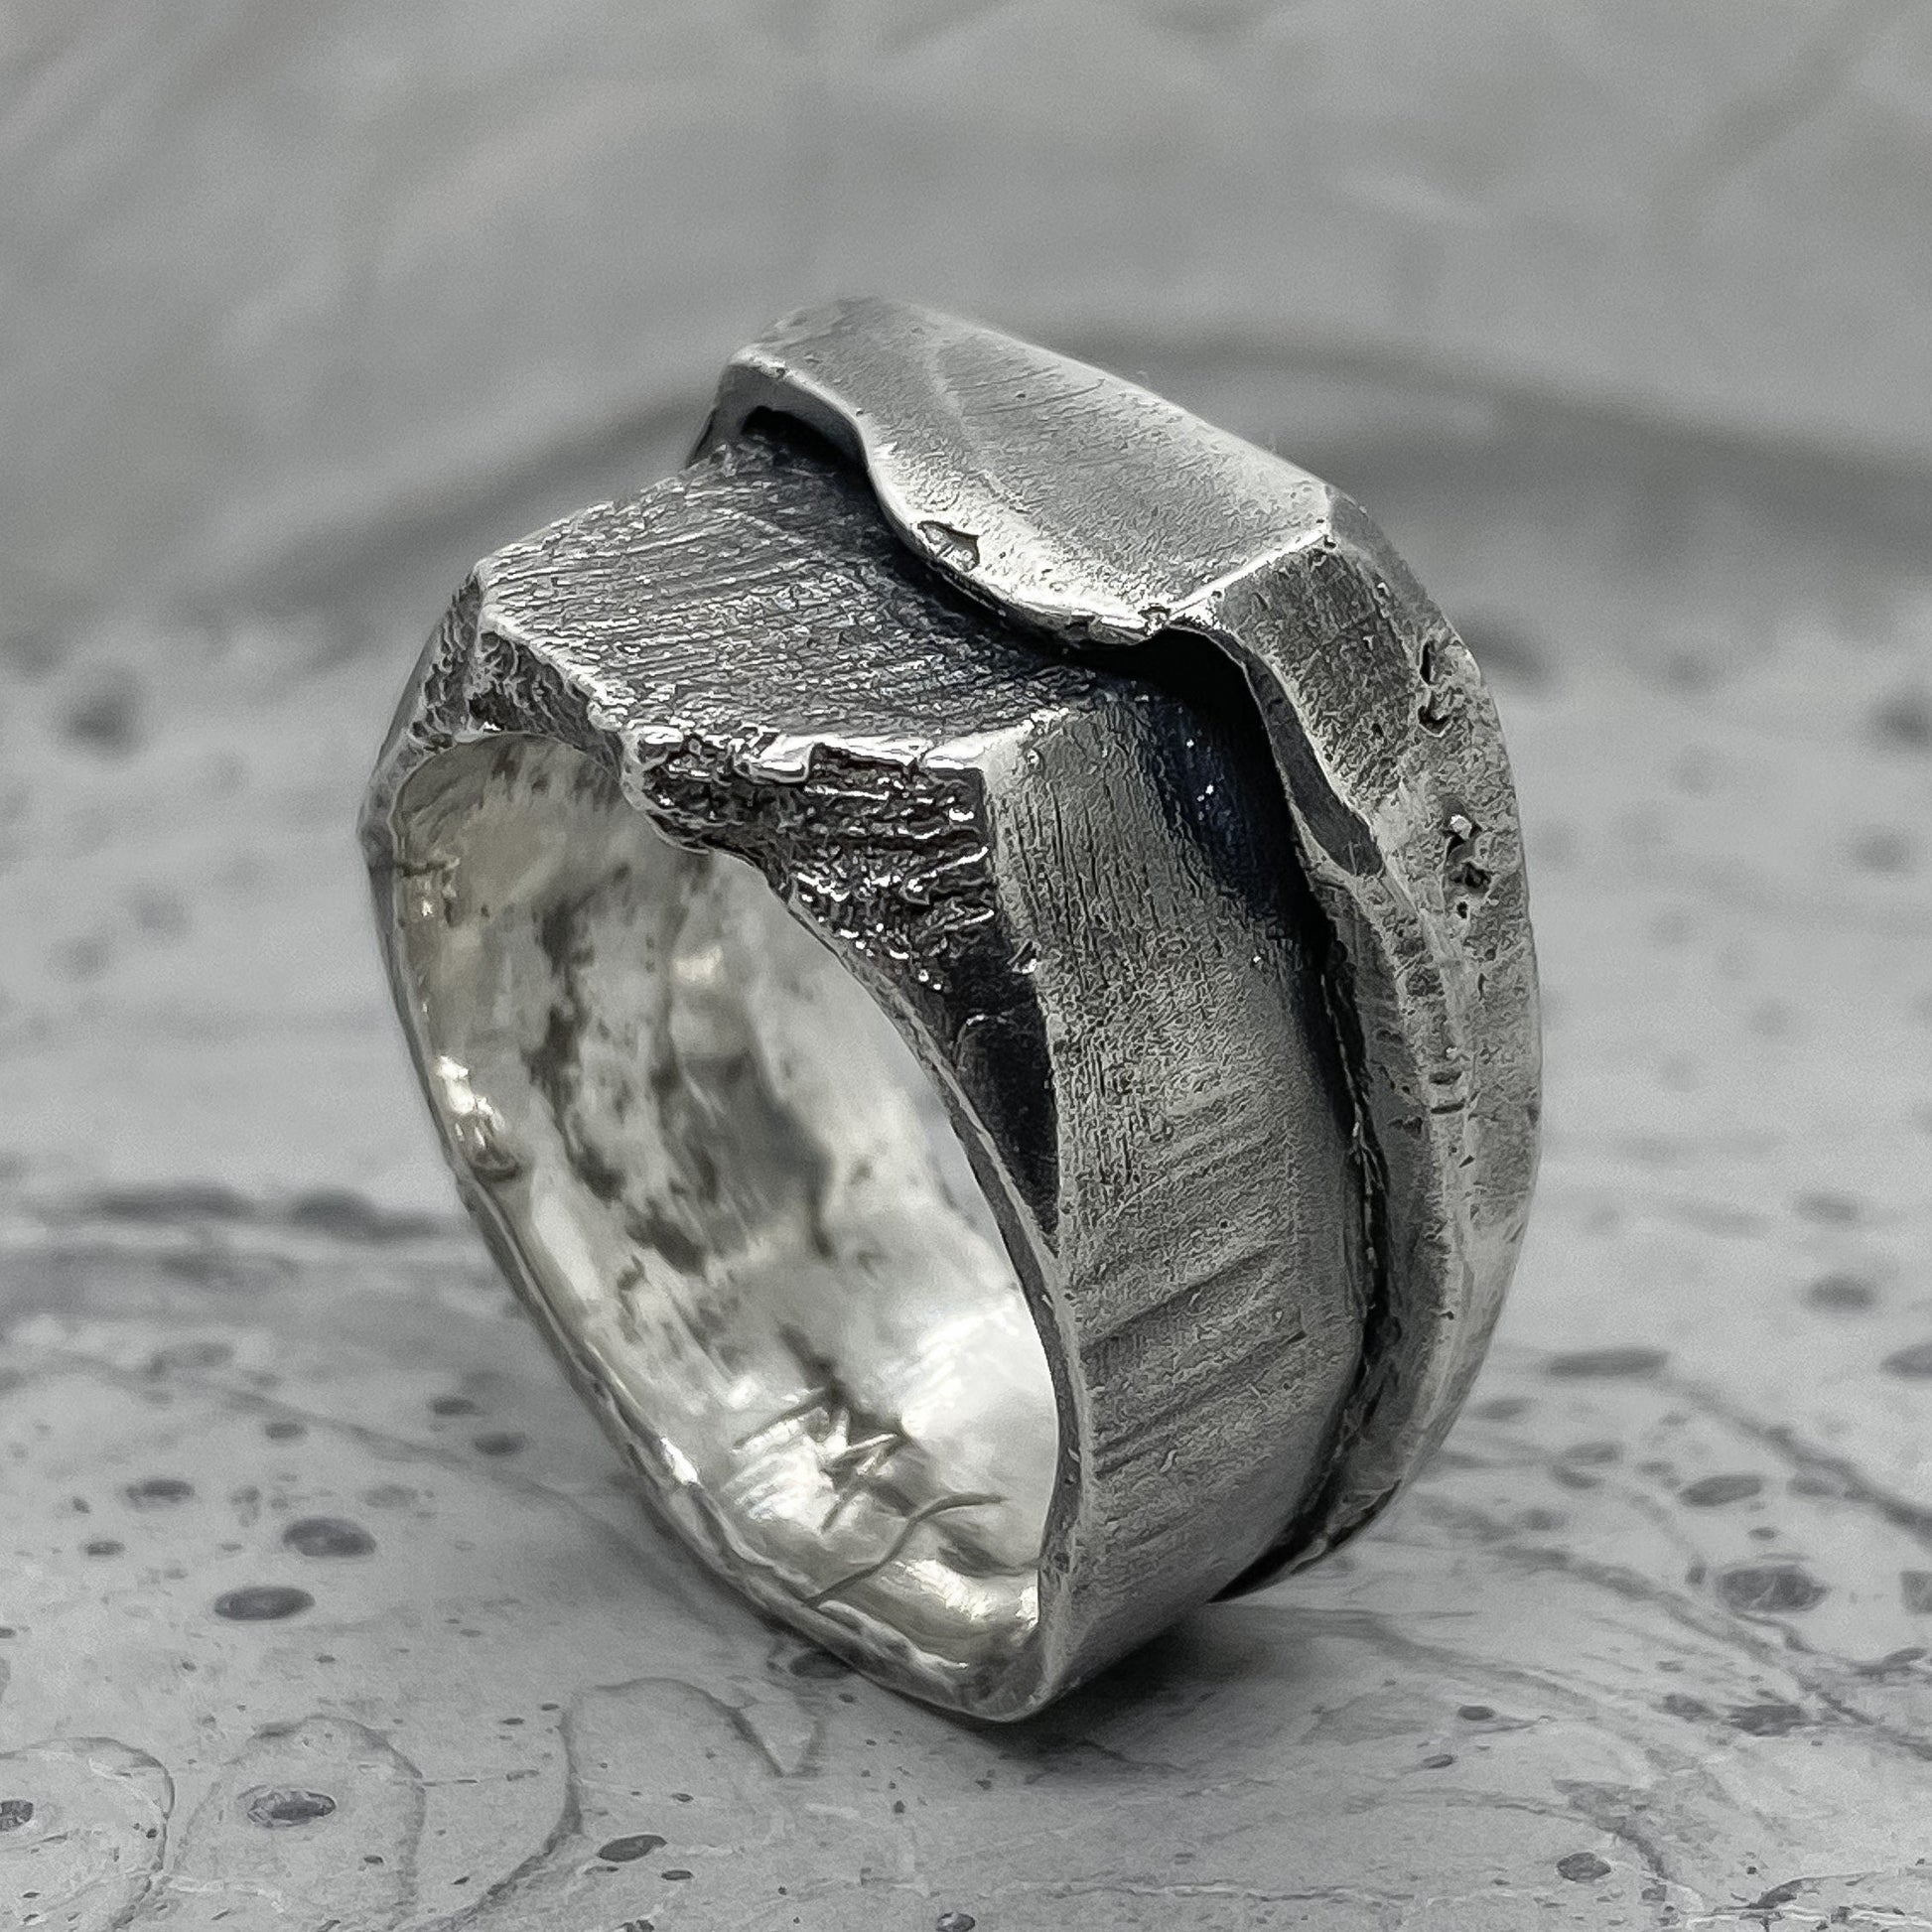 Union ring -massive ring with a combination of two shapes and textures Unusual rings Project50g 